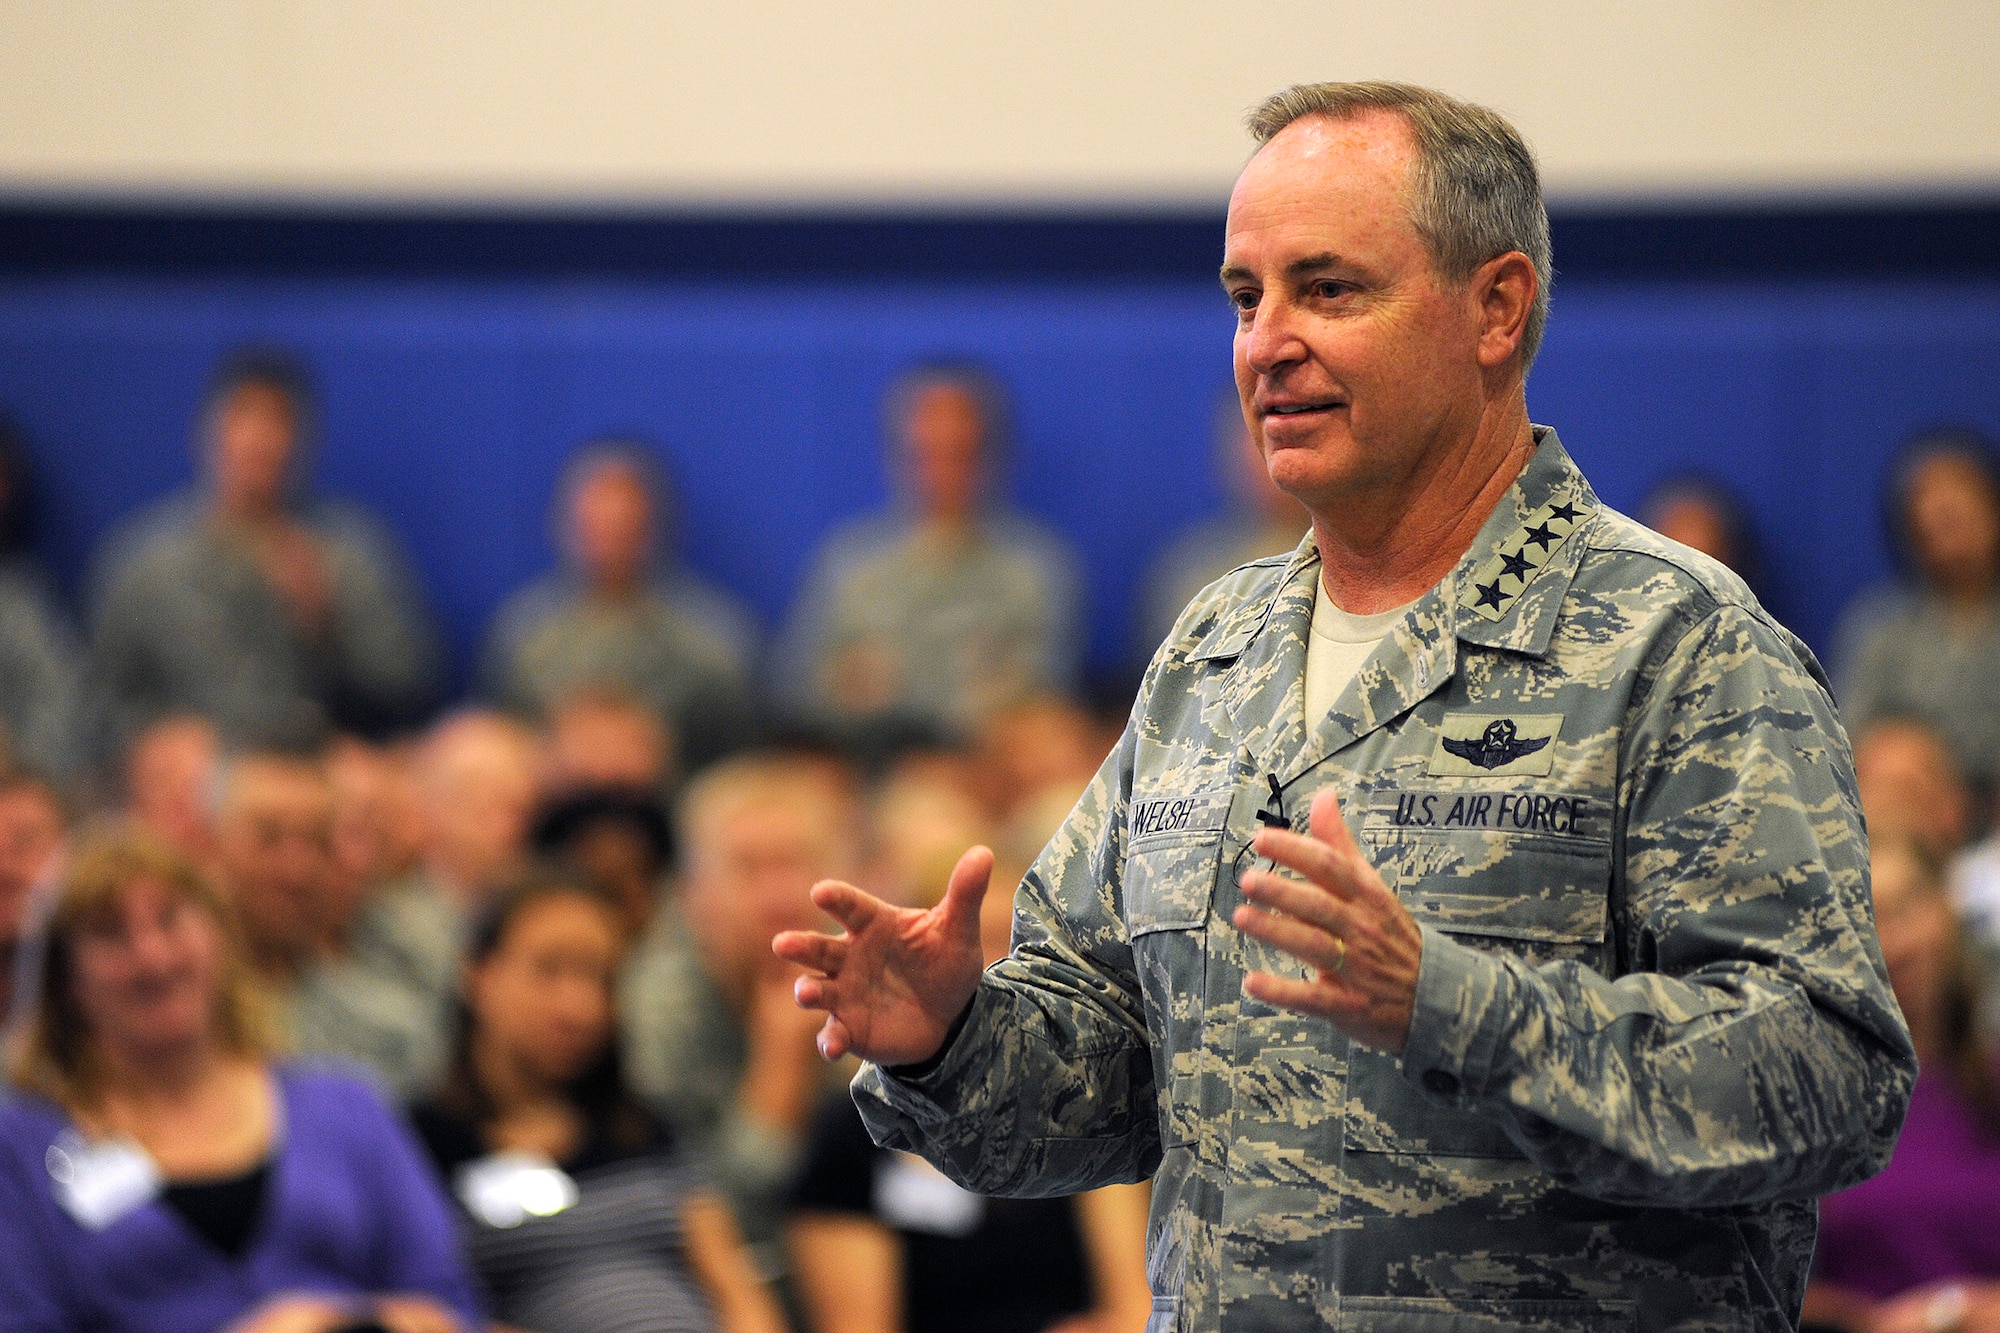 Air Force Chief of Staff Gen. Mark A. Welsh III talks to the Schriever Air Force Base men and women during an Airman’s call July 19, 2013.  As part of a two-day visit to Colorado Springs, the chief and his wife, Betty, thanked Airmen for their continued service and dedication, and addressed issues concerning Airmen and their families. (U.S. Air Force photo/Dennis Rogers)